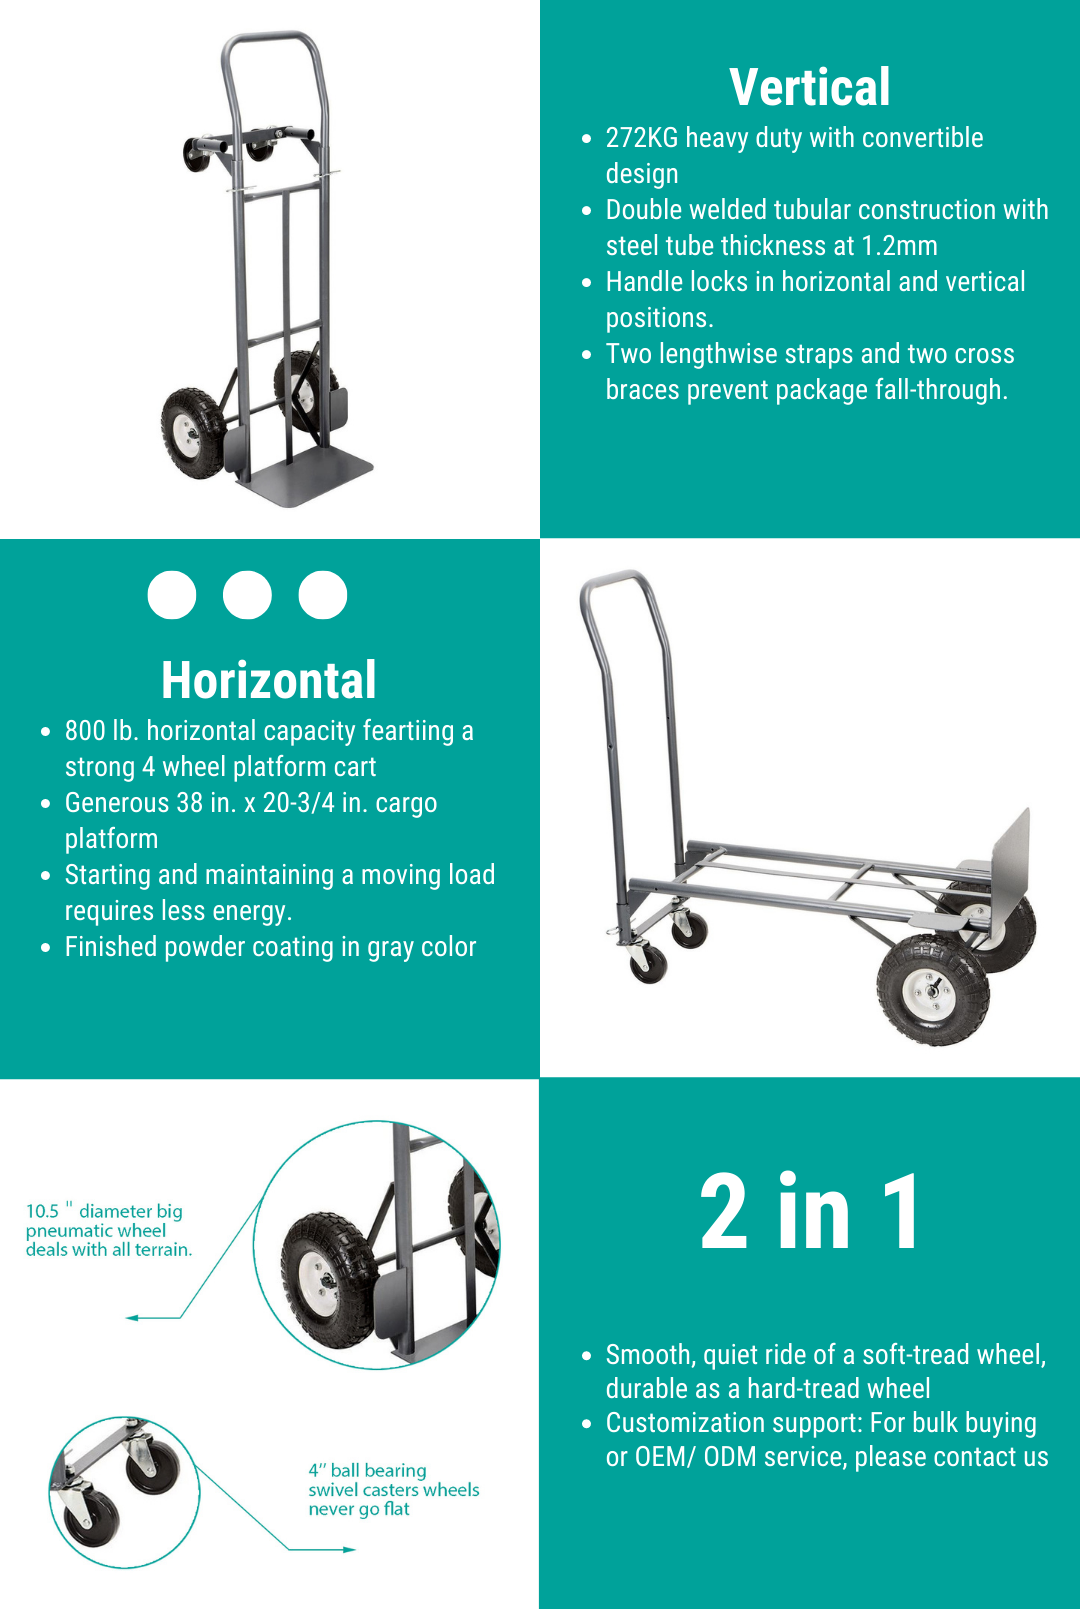 New Products Launch - A Brand New Series of Steel Hand Trucks